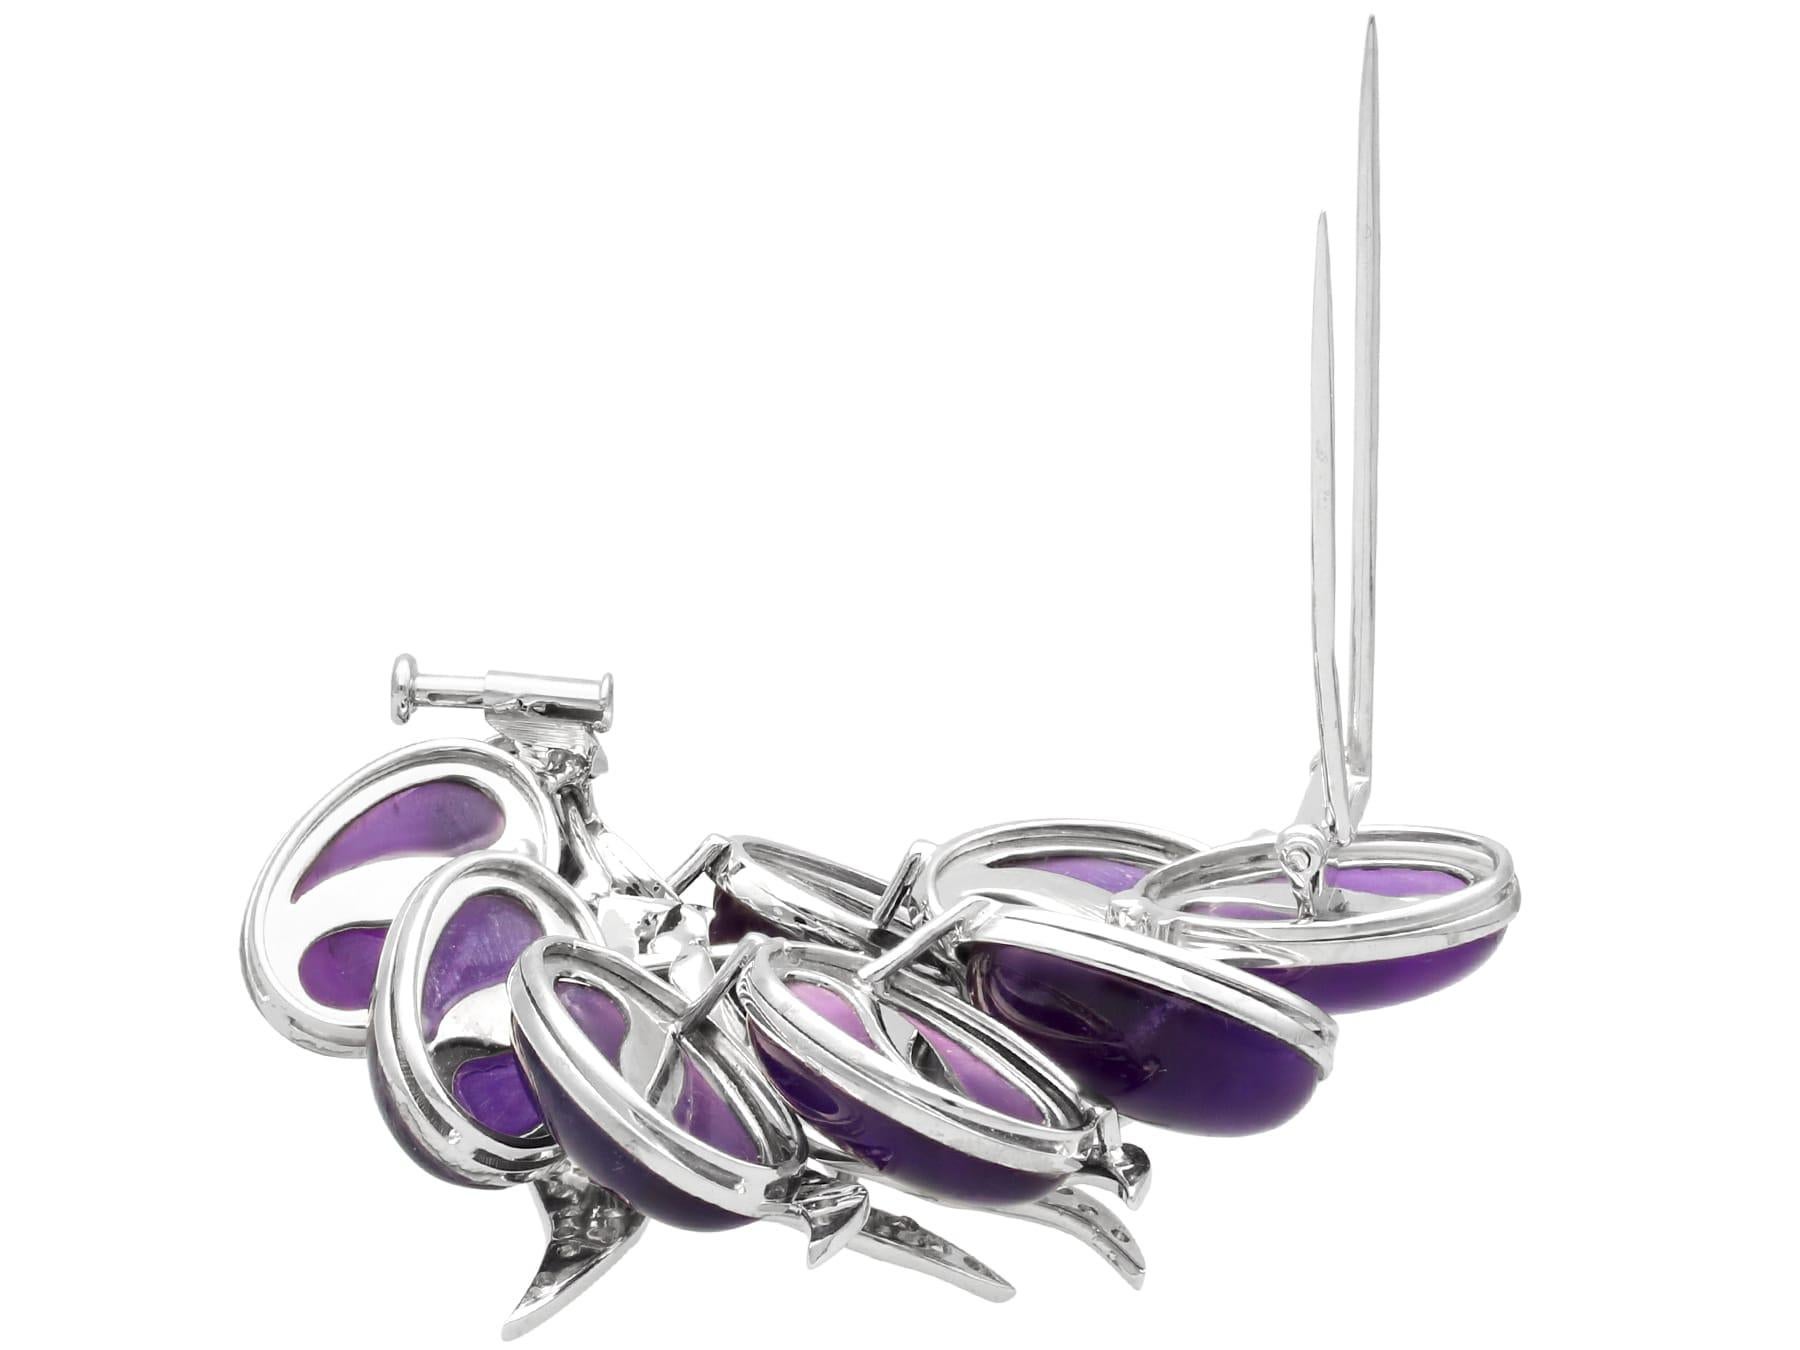 Vintage 55Ct Amethyst and 3.02Ct Diamond 18k White Gold Brooch Circa 1950 For Sale 1